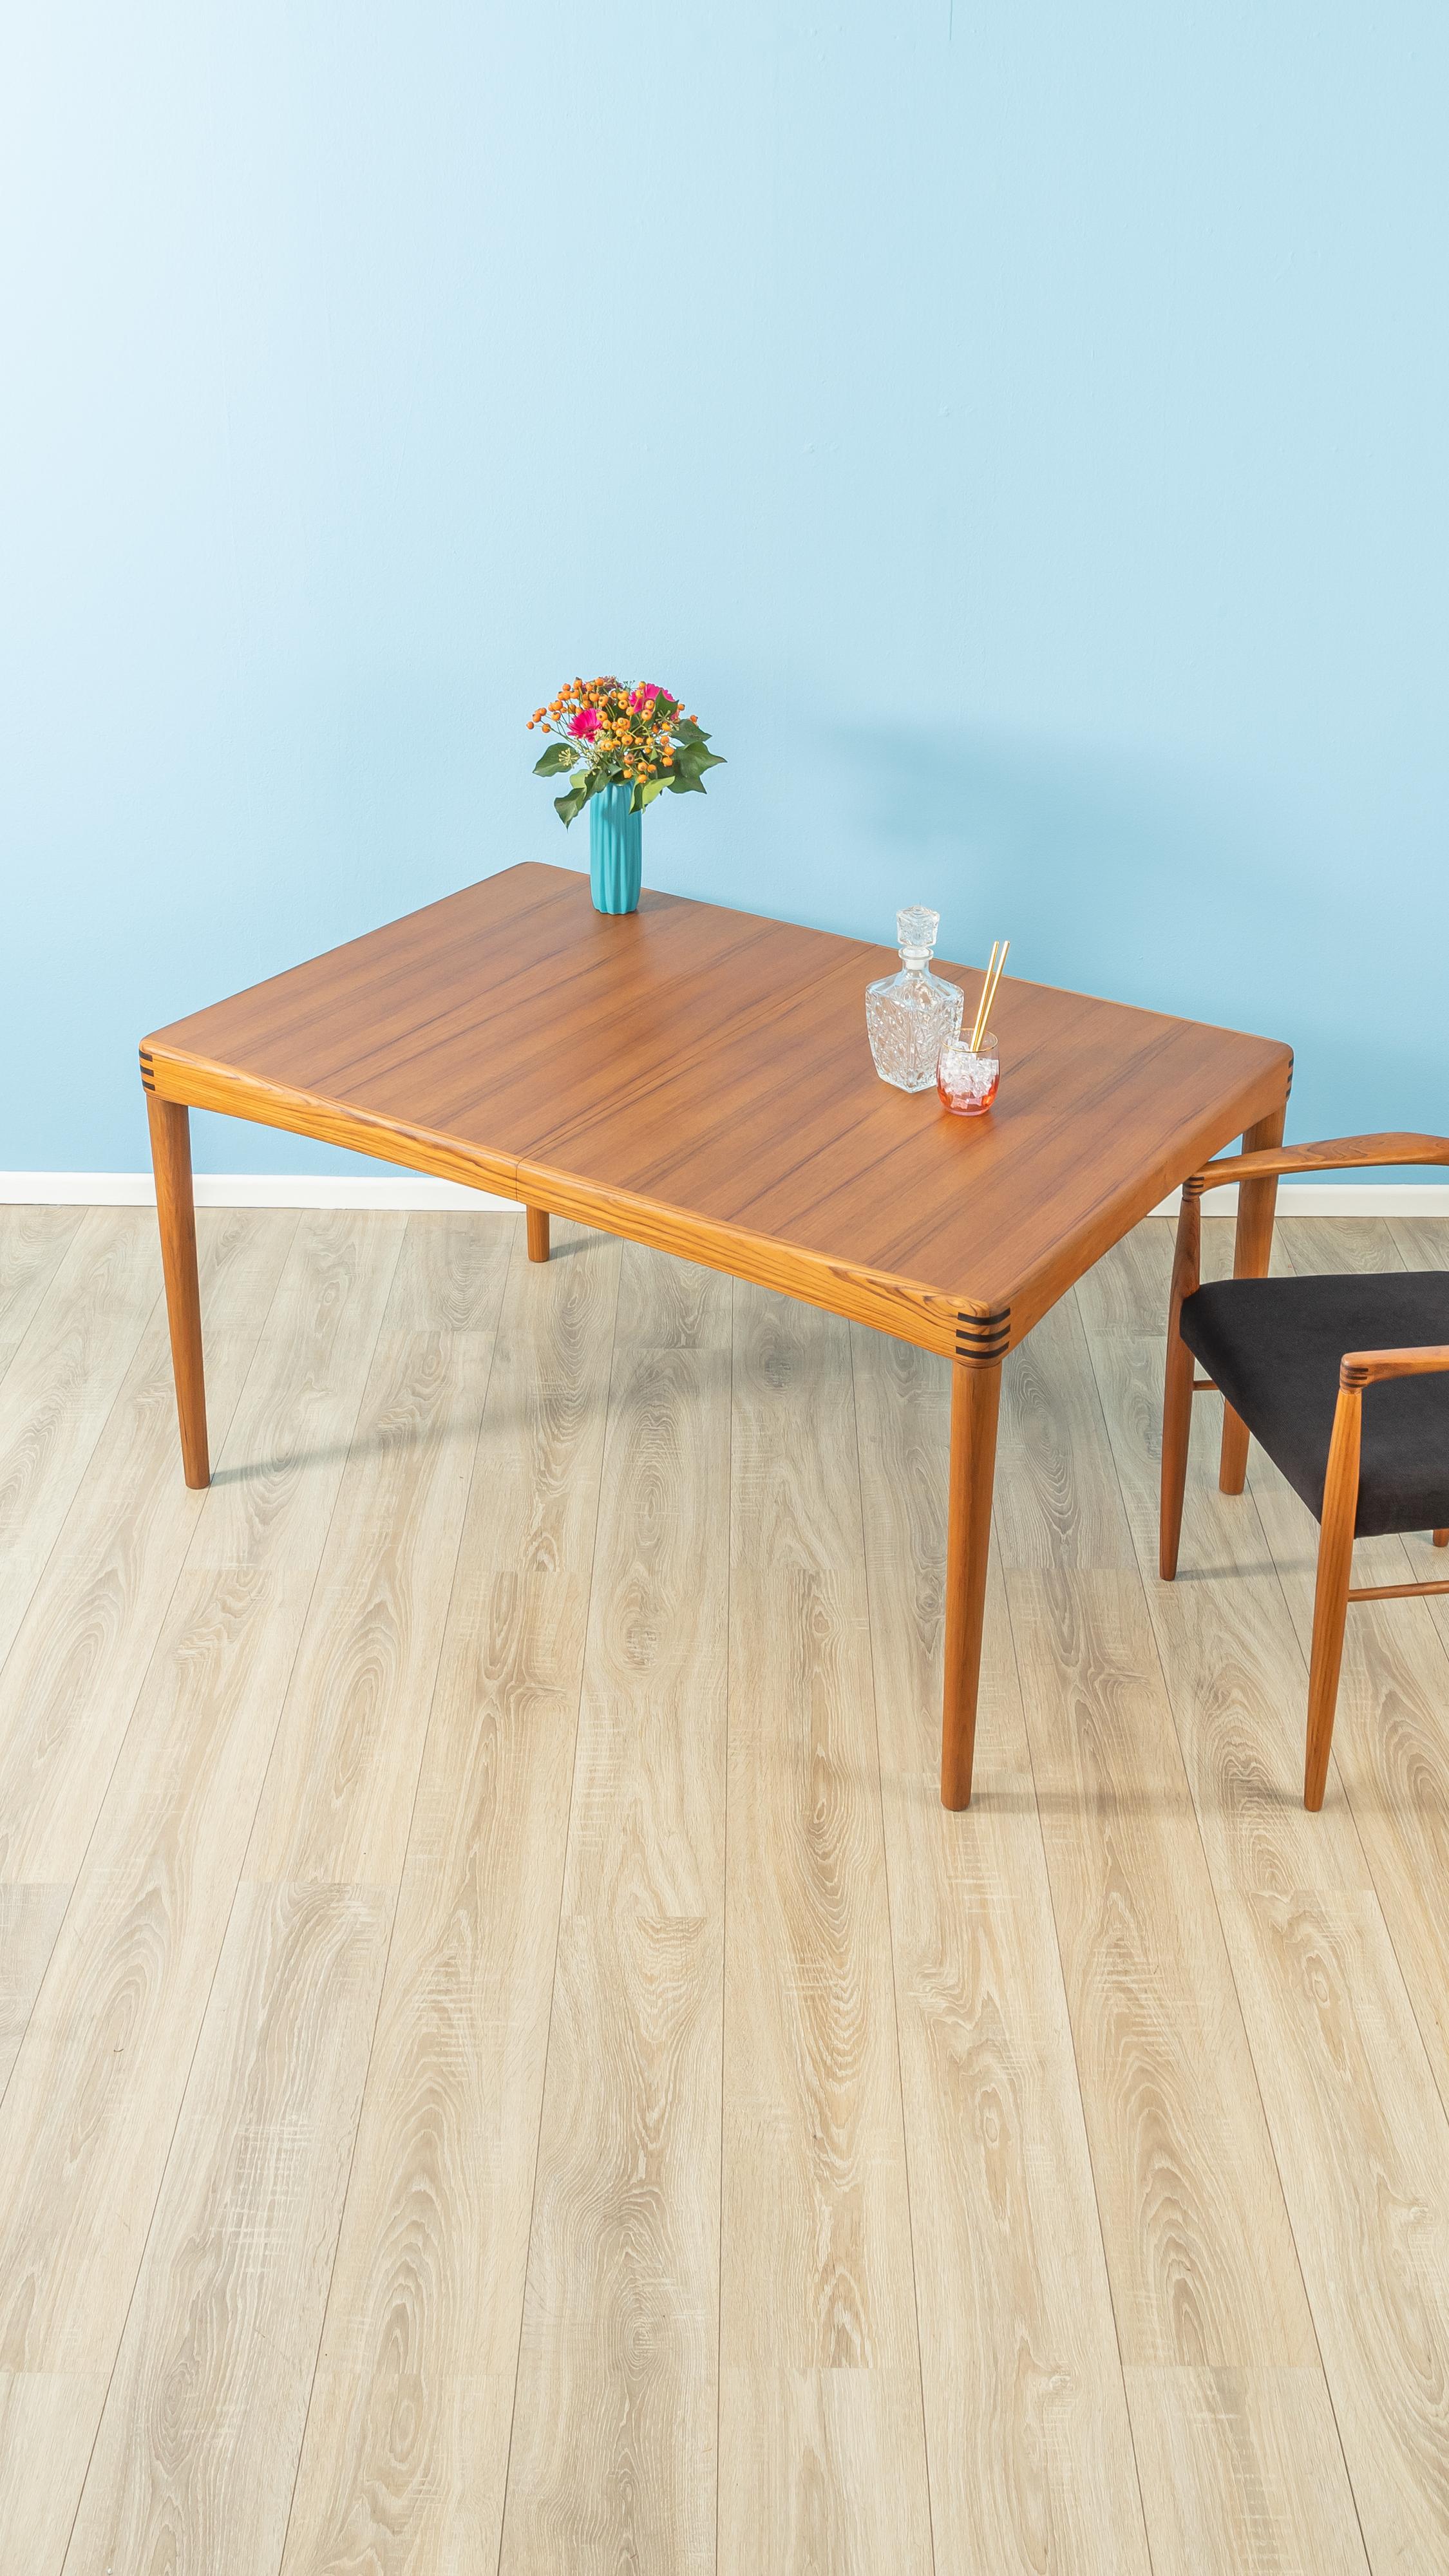 Classic teak dining table from the 1960s by H.W. Klein for Bramin. Solid frame and veneered table top with solid wood edge. The insert plate can be stowed under the table top.

Quality Features:
- accomplished design: perfect proportions and